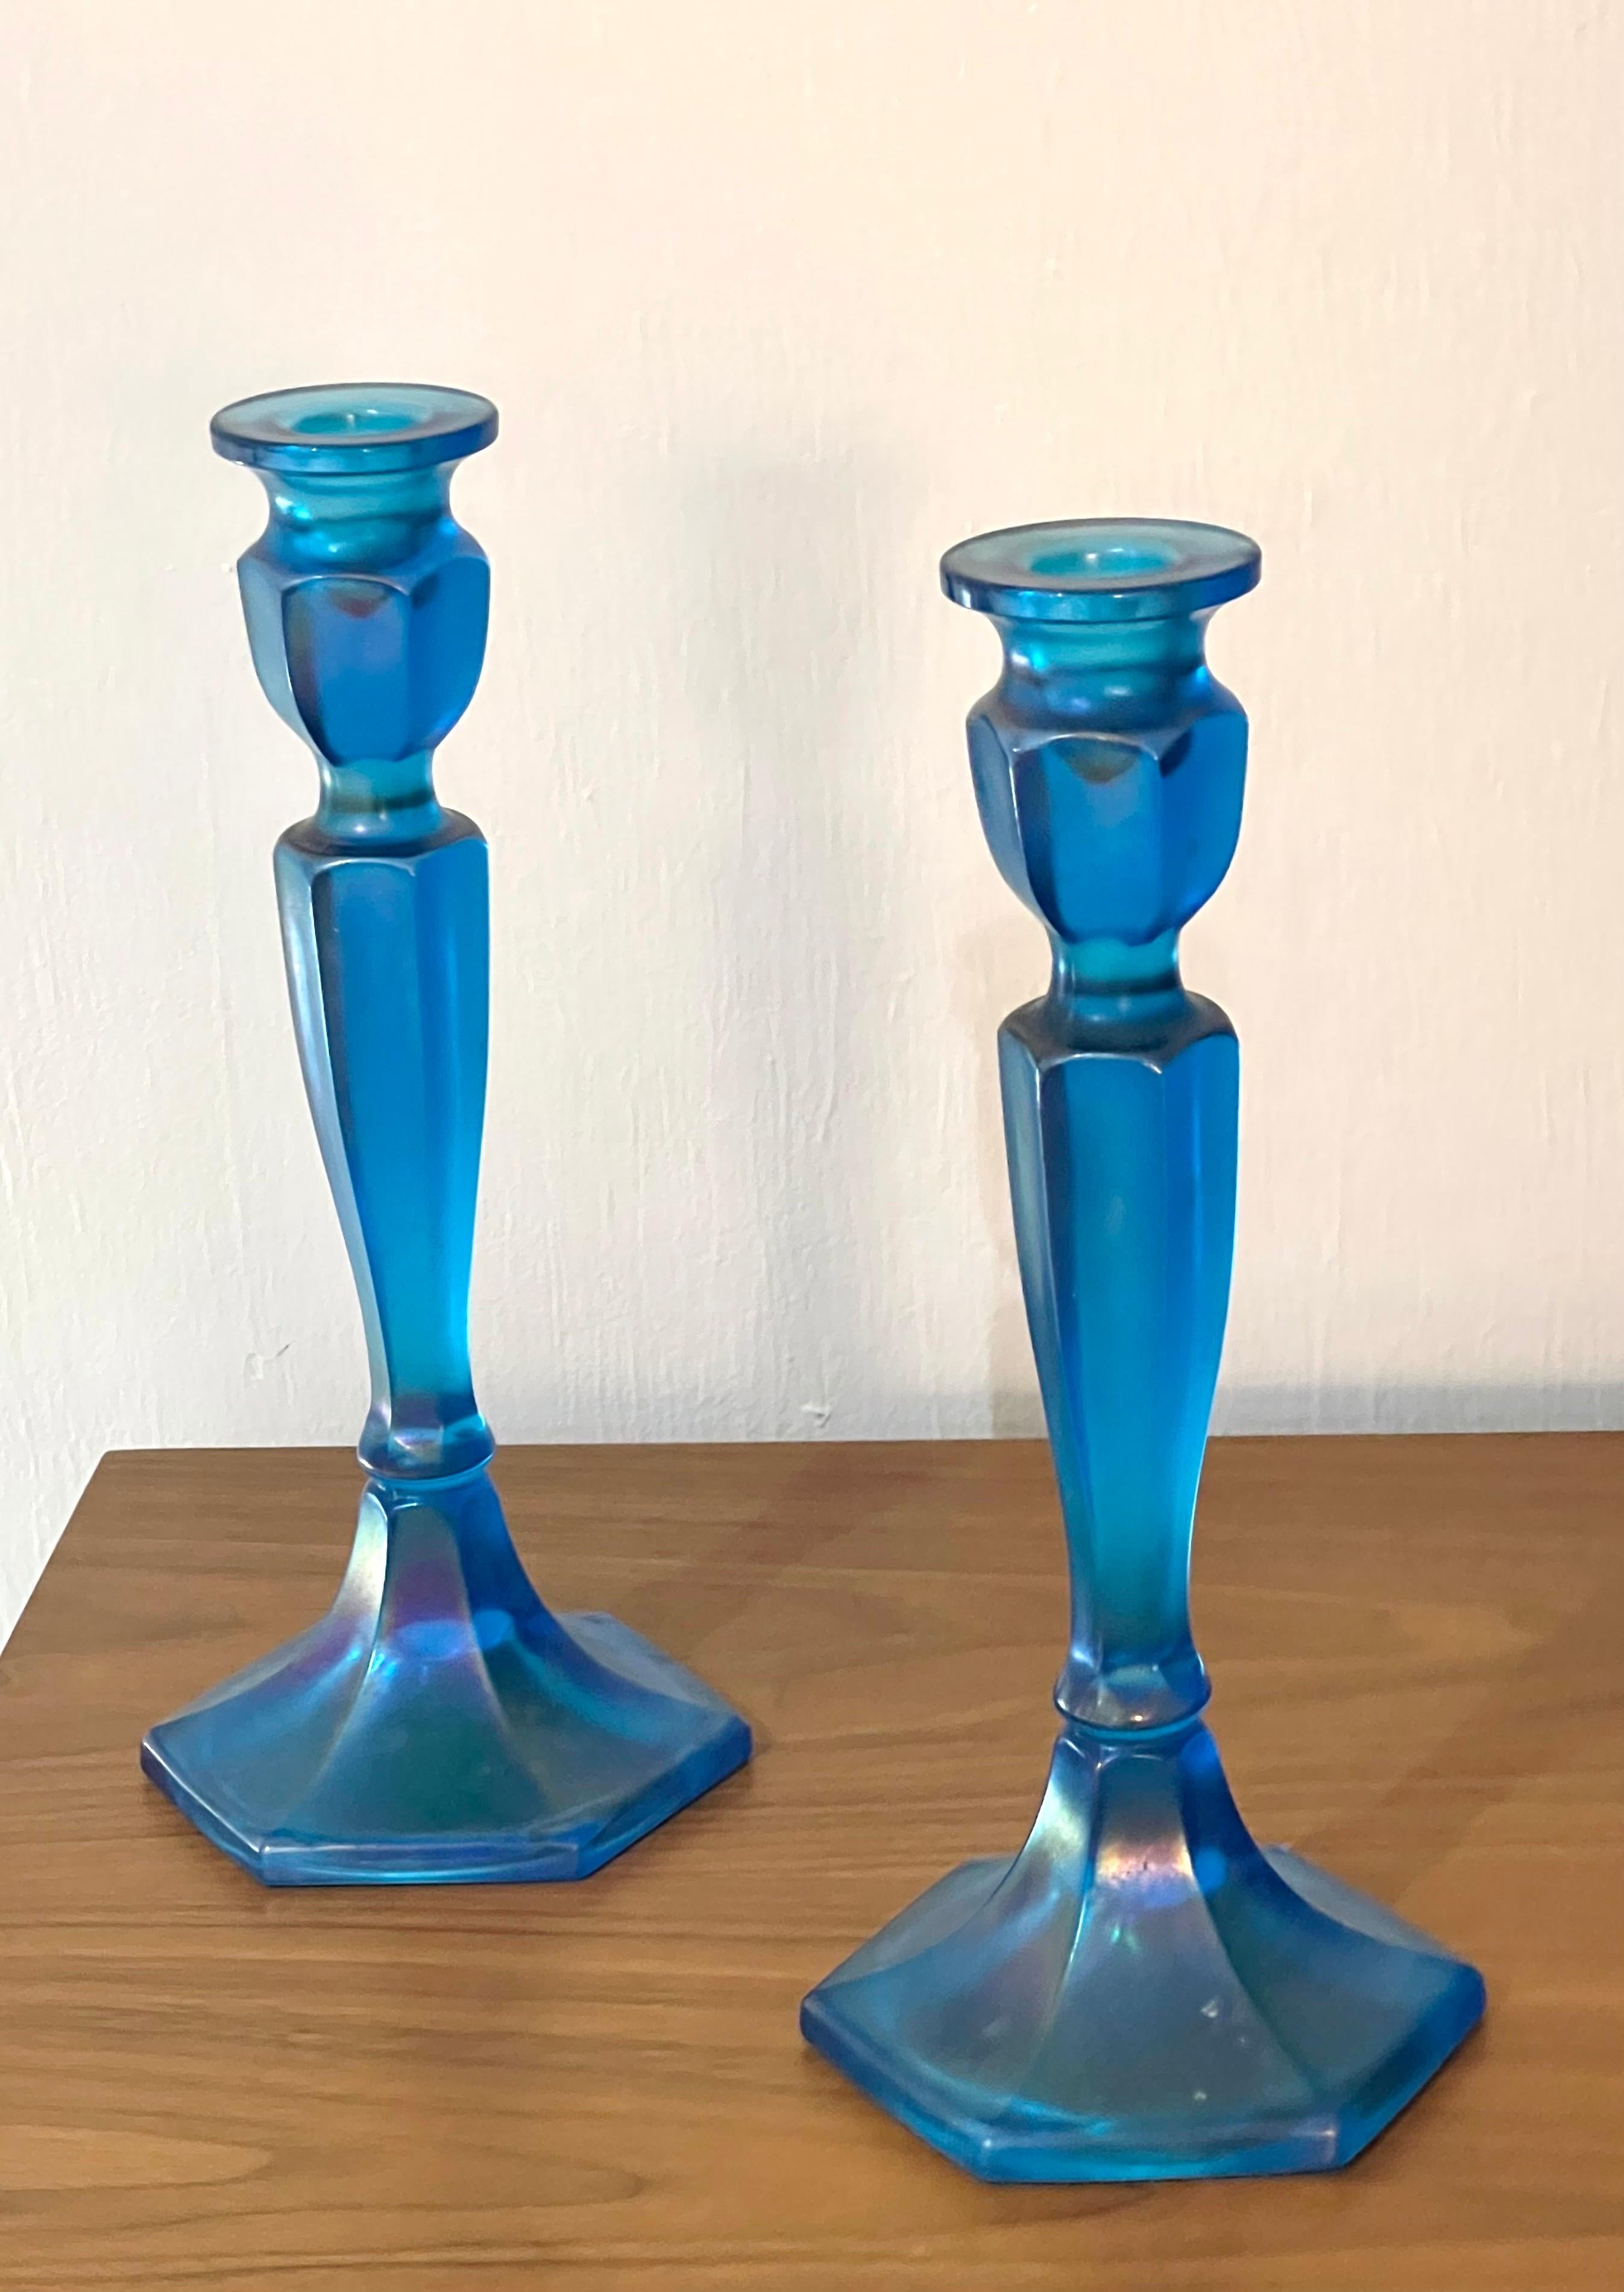 A pair of blue Favrile glass candlesticks. Reminiscent of Tiffany’s glass.